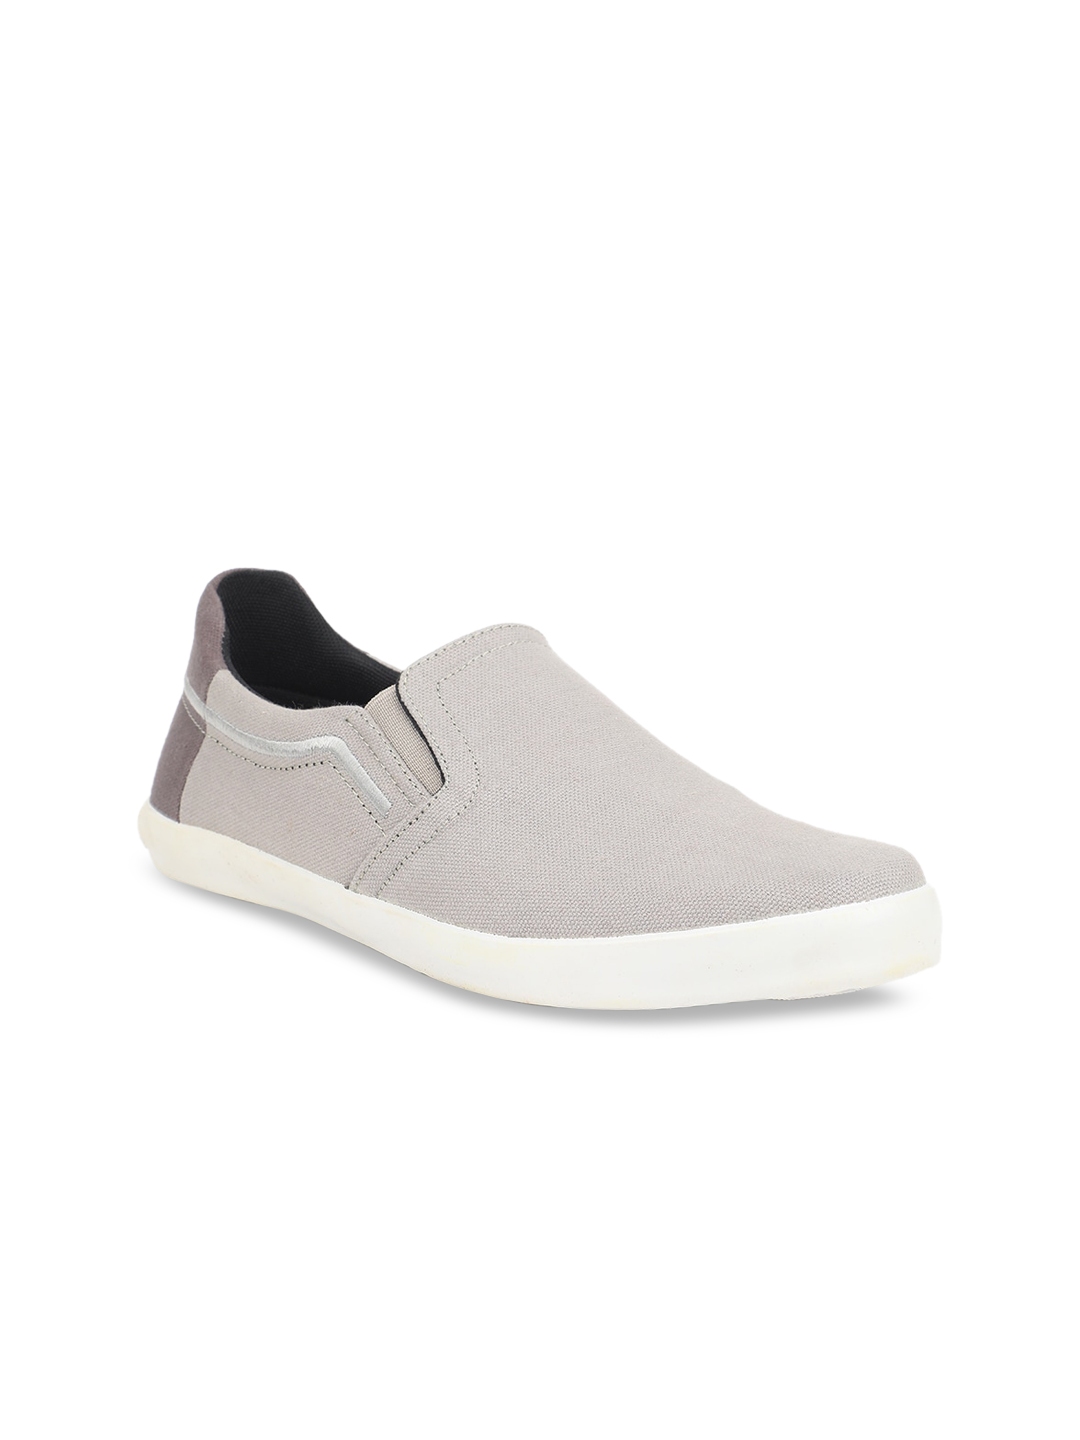 Buy North Star Men Grey Colourblocked Slip On Sneakers - Casual Shoes ...